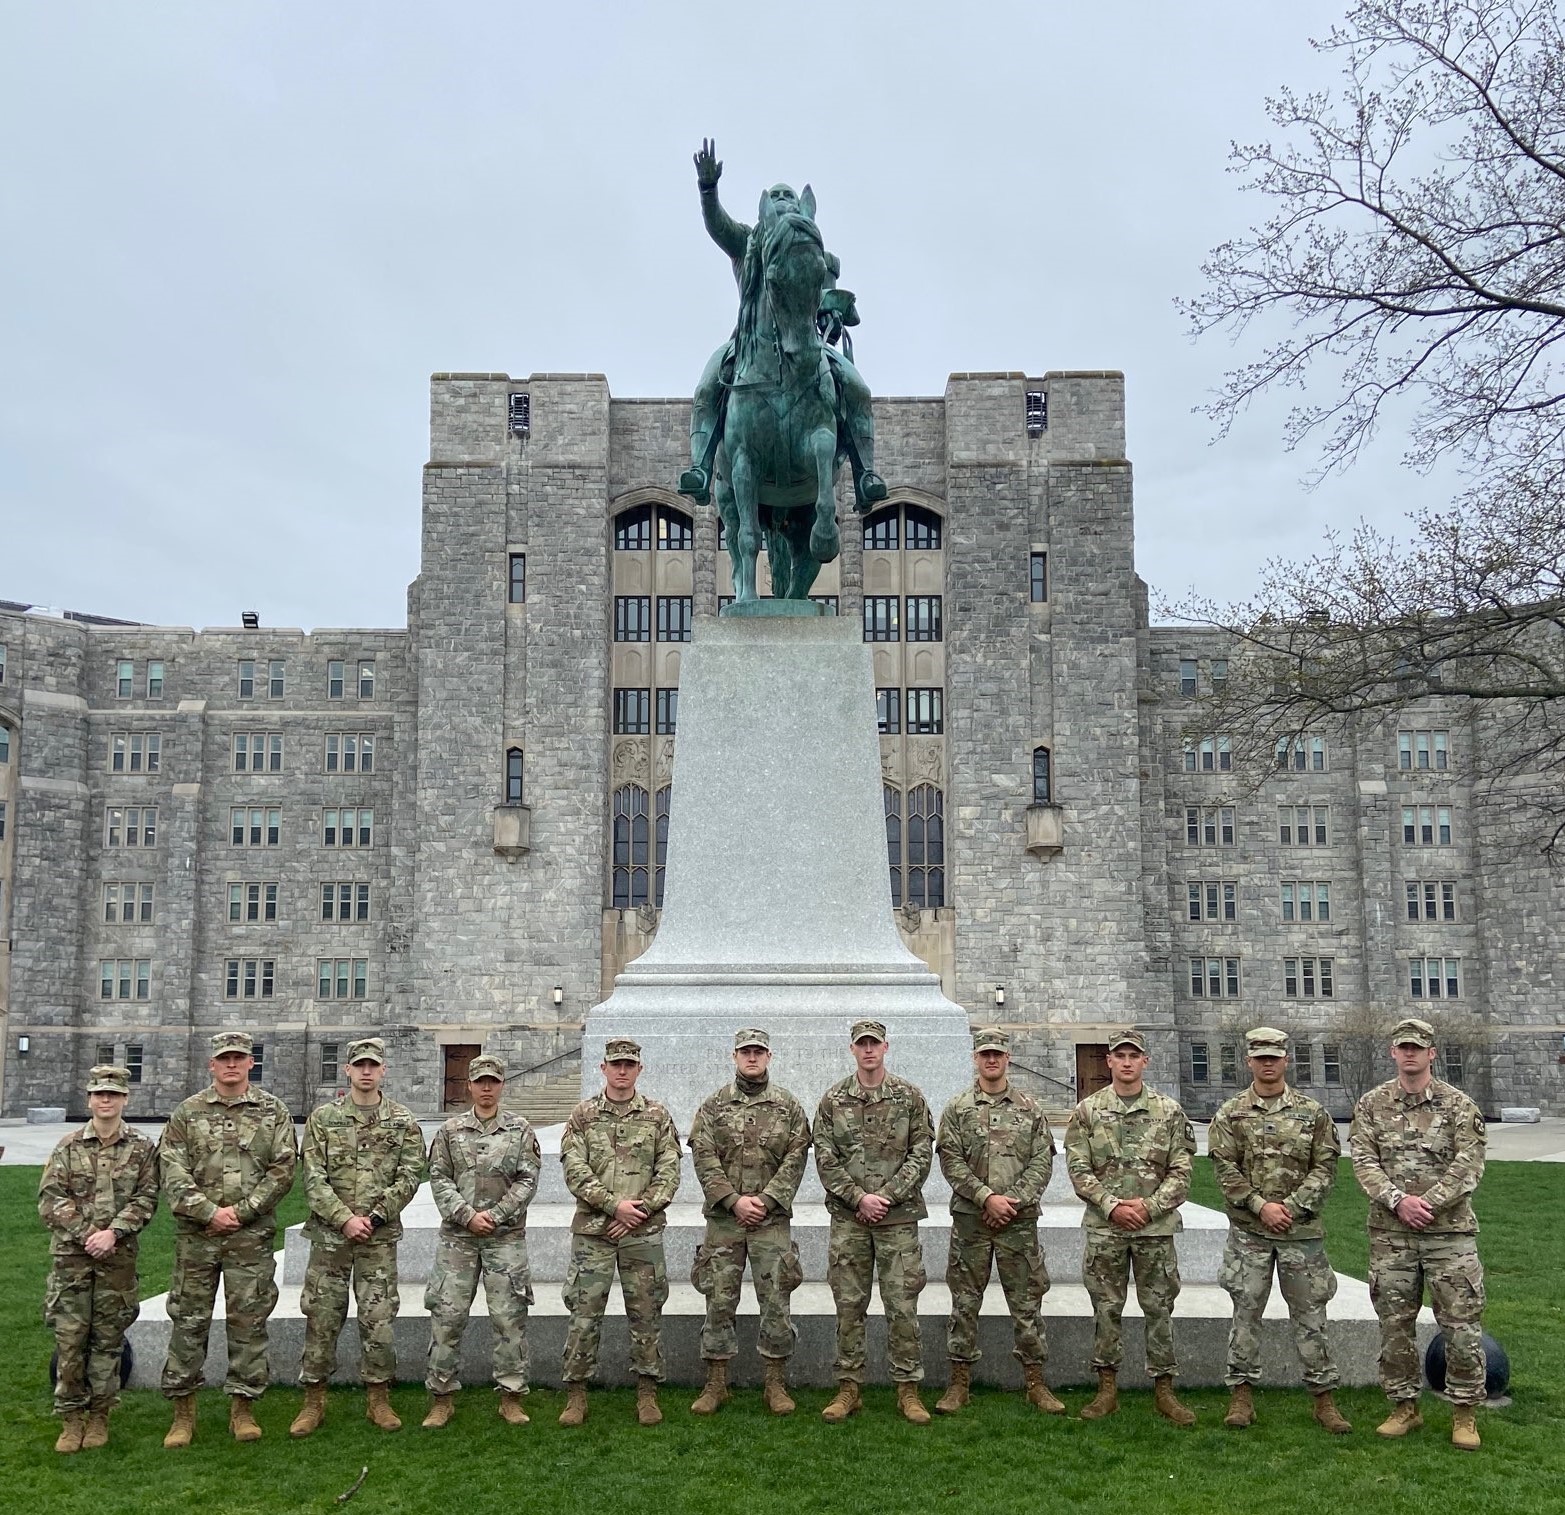 Austin Peay’s ROTC Ranger Challenge team will compete at Sandhurst, the world’s premier international academy military skills competition, starting today.  The team will be one of the teams who earned a spot to compete at this year’s prestigious competition, which runs through the weekend.  The team last competed at Sandhurst, hosted by the U.S. Military Academy at West Point, New York, in 2019. The event was canceled because of the COVID-19 pandemic last year.  Check www.apsu.edu/news for updates on Saturday, Sunday and Monday. You also can follow the team’s progress at West Point’s Sandhurst page.  Who’s on the team  Ryan Nanzer is the captain of the team. He and five other ROTC students return from last year’s team. They are:  • Thomas Rose. • Shawn King. • Cherady Fine. • Zachary Labas. • Thomas Porter.  The other members of the team who traveled to West Point are:  • Quinton Nunn. • Thomas Haas. • Dylan Dominique. • Christopher Mains. • Angela Kim.  Mark Harrington II is the team’s alternate.  The team has been rigorously training for Sandhurst by conducting dismounted foot marches, weight training, running, and individual and group skills training, said Lt. Col. Mark Barton, the professor of military science for Austin Peay’s ROTC program.  ‘Tenacity and grit of future military leaders’  The U.S. Military Academy has hosted the competition since 1967, and it has grown to include teams from across the country and the world. The competition takes the cadets through a rigorous 36-hour course “to test warrior spirit, team cohesion and dedication to mission accomplishment.”  The course covers 16 events across 27 miles and tests individual and squad military skill mastery.  This year, 16 Reserve Officer Training Corps programs, 25 U.S. Military Academy teams and three teams from other U.S. service academies. International teams are not competing this year because of COVID-19 restrictions.  The Austin Peay team earned its spot at Sandhurst by winning the 7th Brigade ROTC Bold Warrior Challenge in October 2019 at Fort Knox, Kentucky. Austin Peay defeated 37 schools from Tennessee, Kentucky, Indiana, Michigan and Ohio.  To learn more  • To learn more about Austin Peay’s ROTC program, go to https://www.apsu.edu/rotc. • For more about the Sandhurst competition, visit https://www.westpoint.edu/military/department-of-military-instruction/sandhurst.